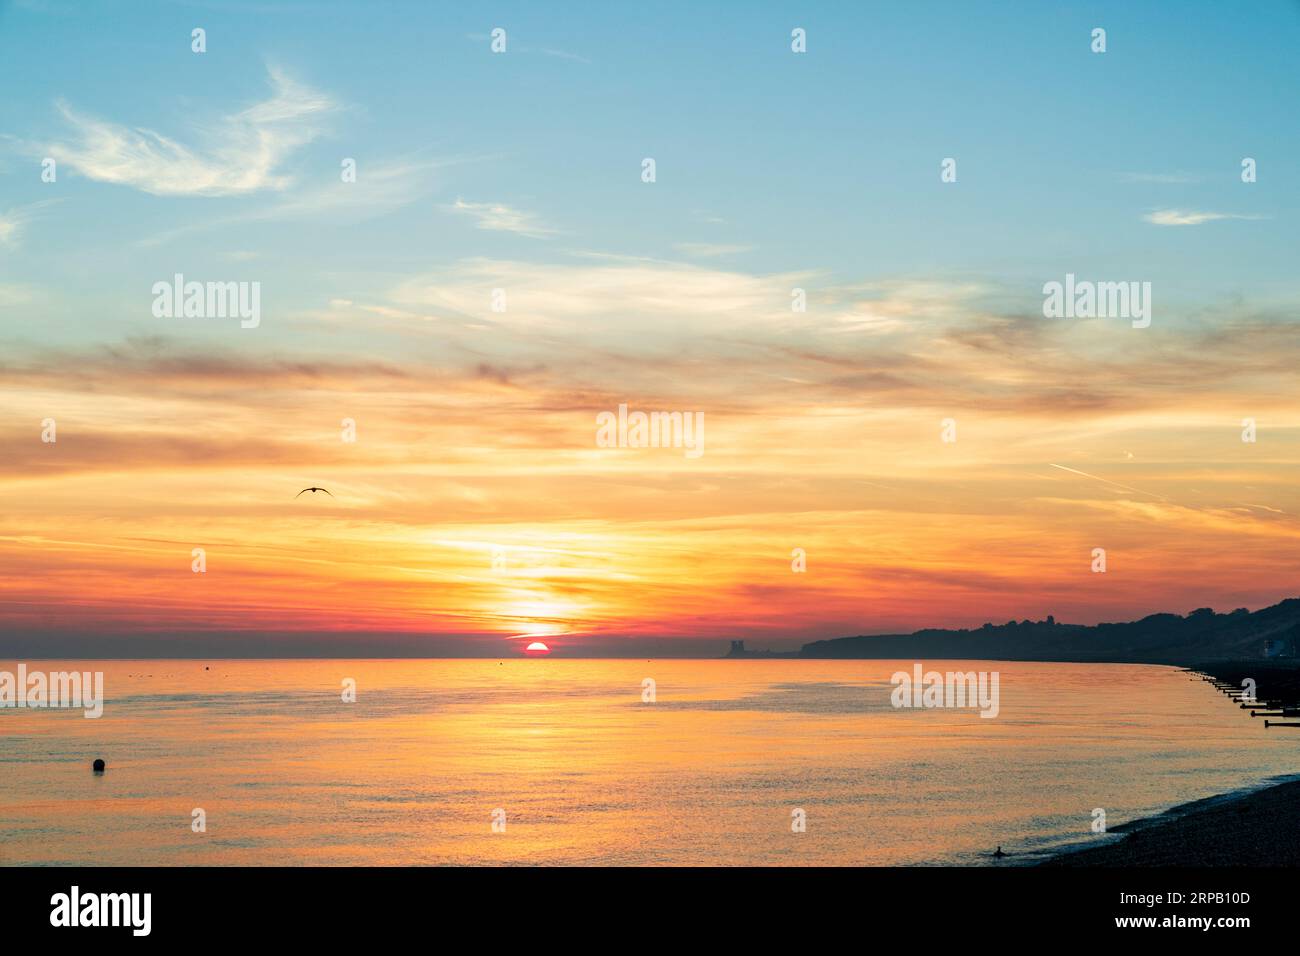 The sunrise seen from the beach at the seafront at Herne Bay on the north English Kent Coast. A blue sky with a vivid layer of red and orange clouds near the horizon, the orange being reflected in the very calm sea. the sun half risen over the sea. Stock Photo